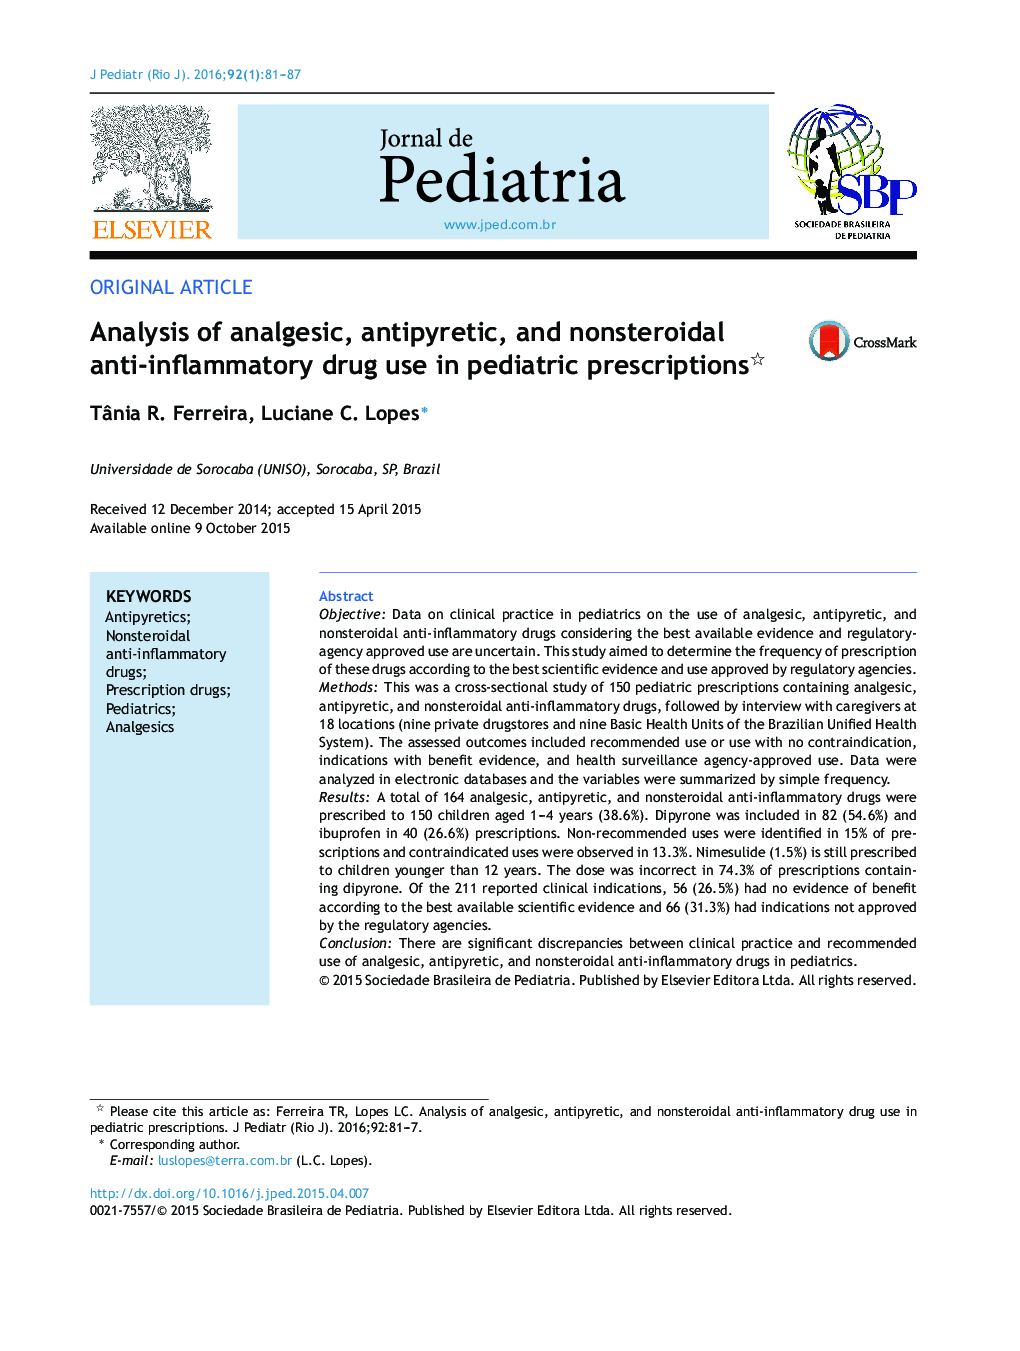 Analysis of analgesic, antipyretic, and nonsteroidal anti-inflammatory drug use in pediatric prescriptions 